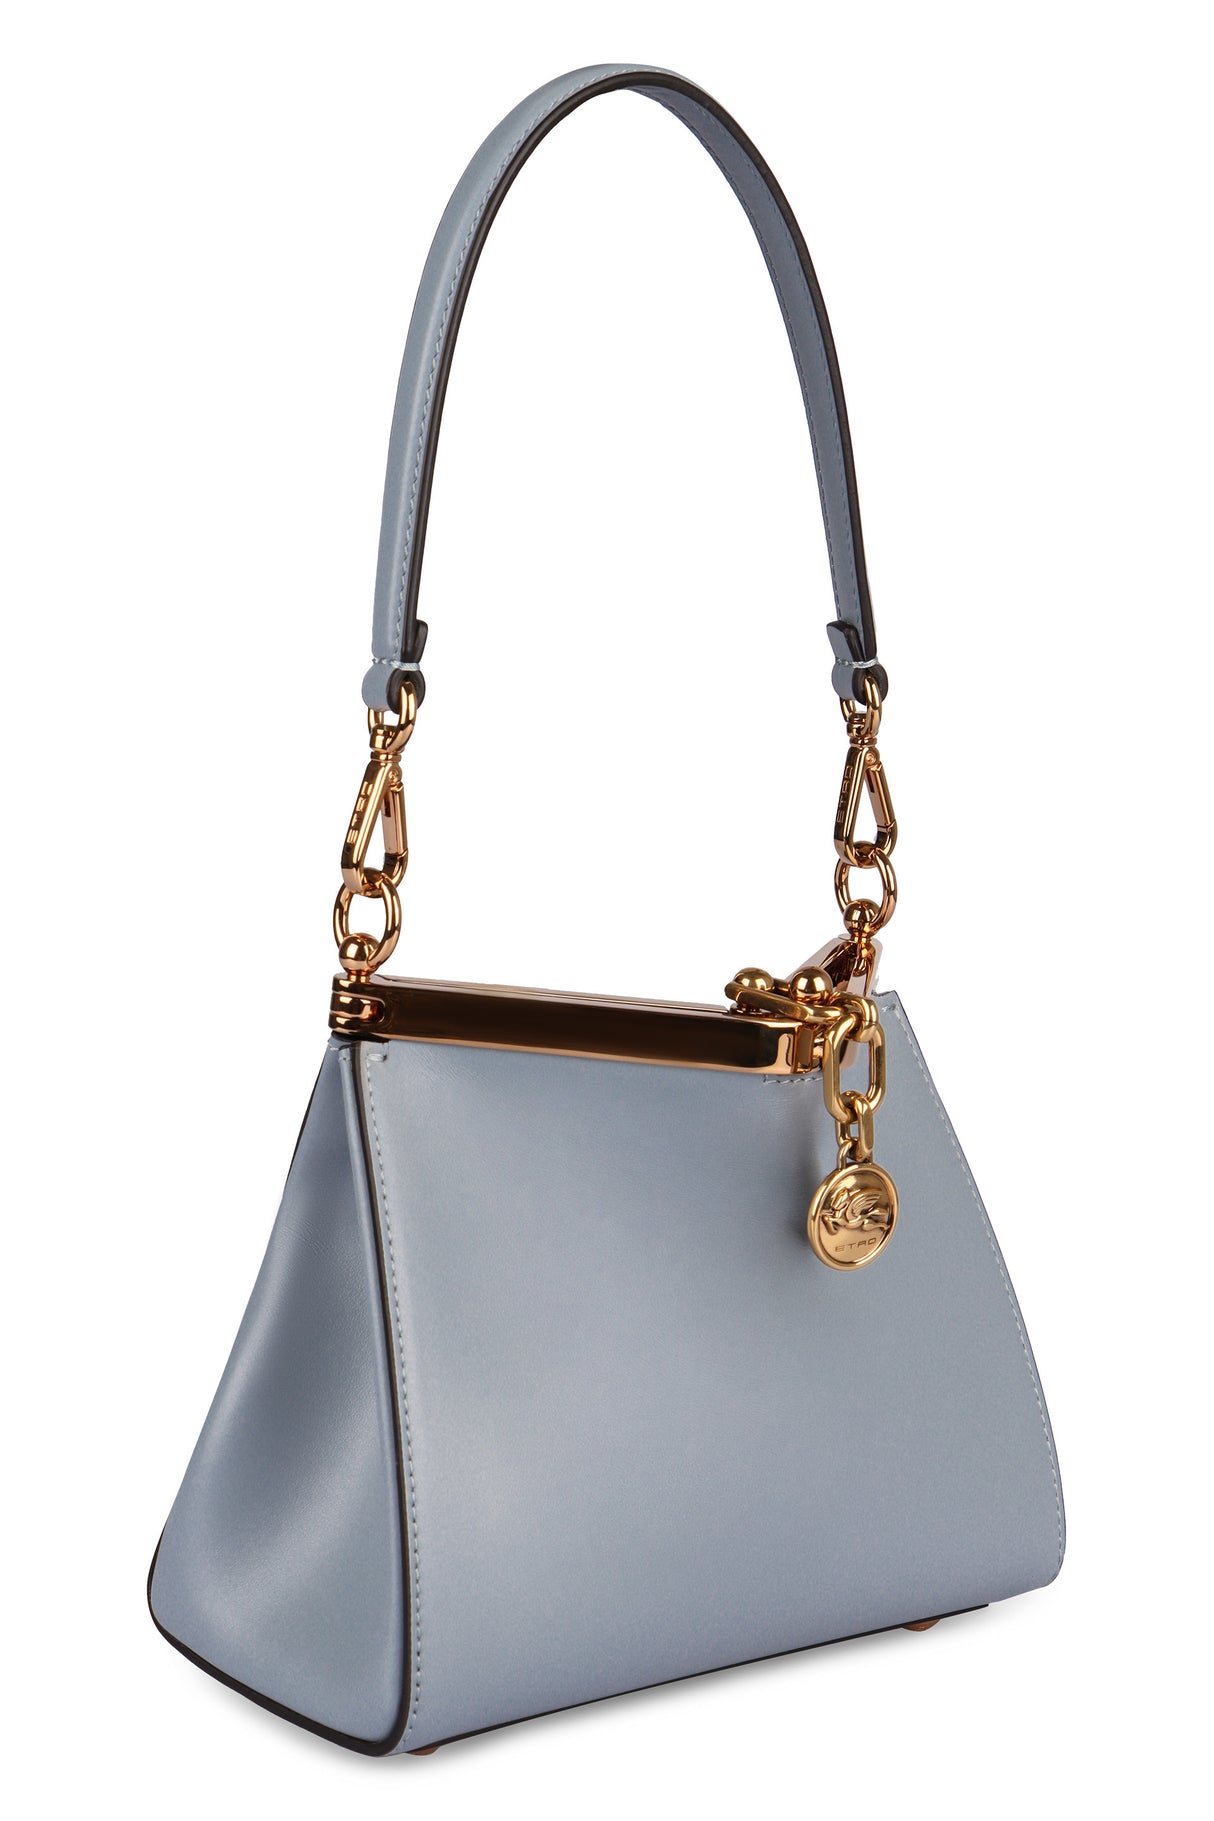 ETRO Light Blue Mini Leather Shoulder Bag with Gold-Tone Hardware and Suede Lining